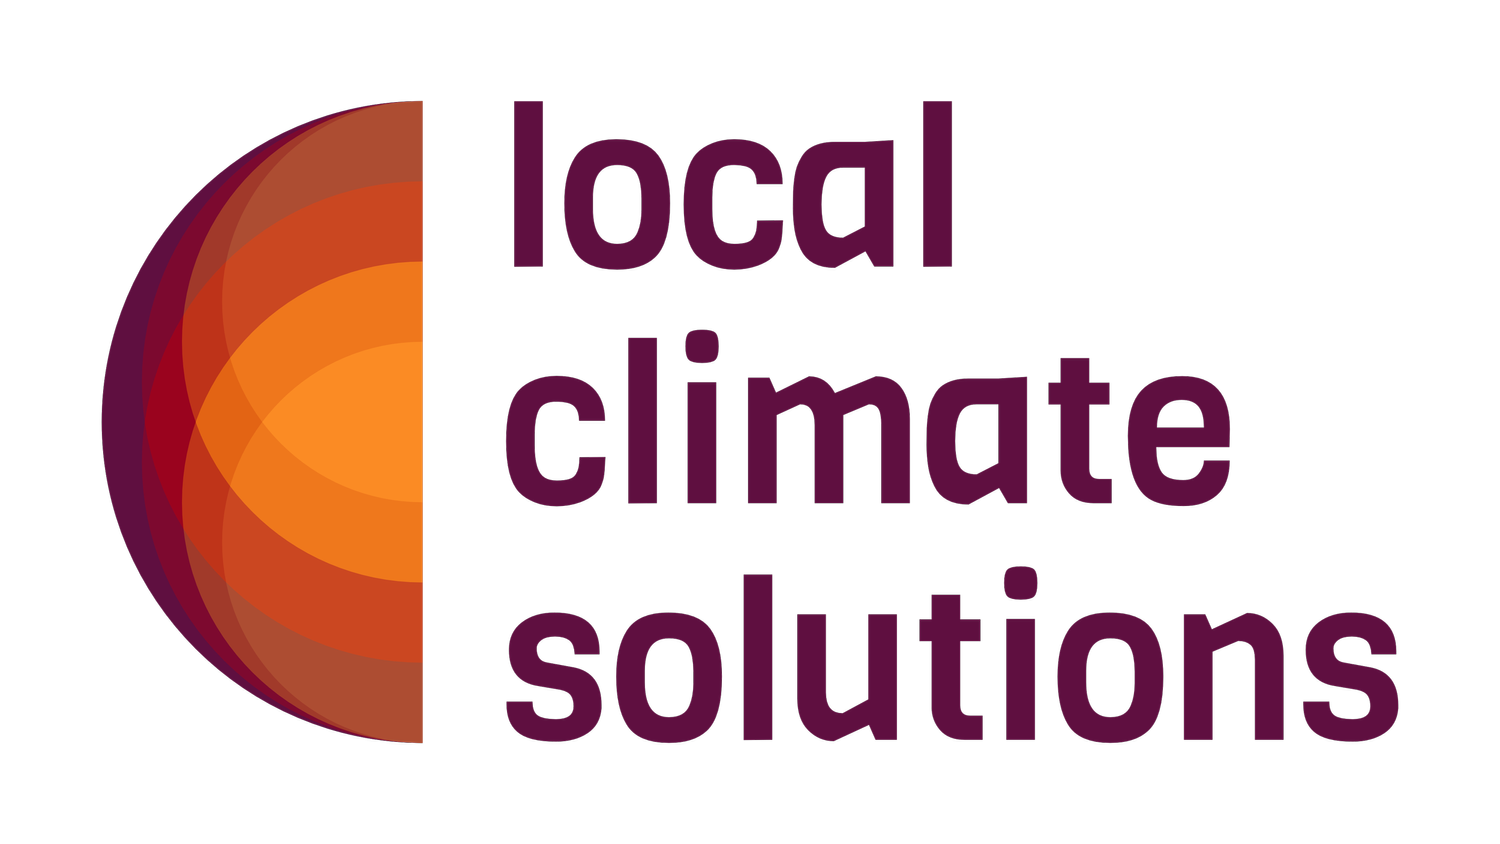 Local Climate Solutions